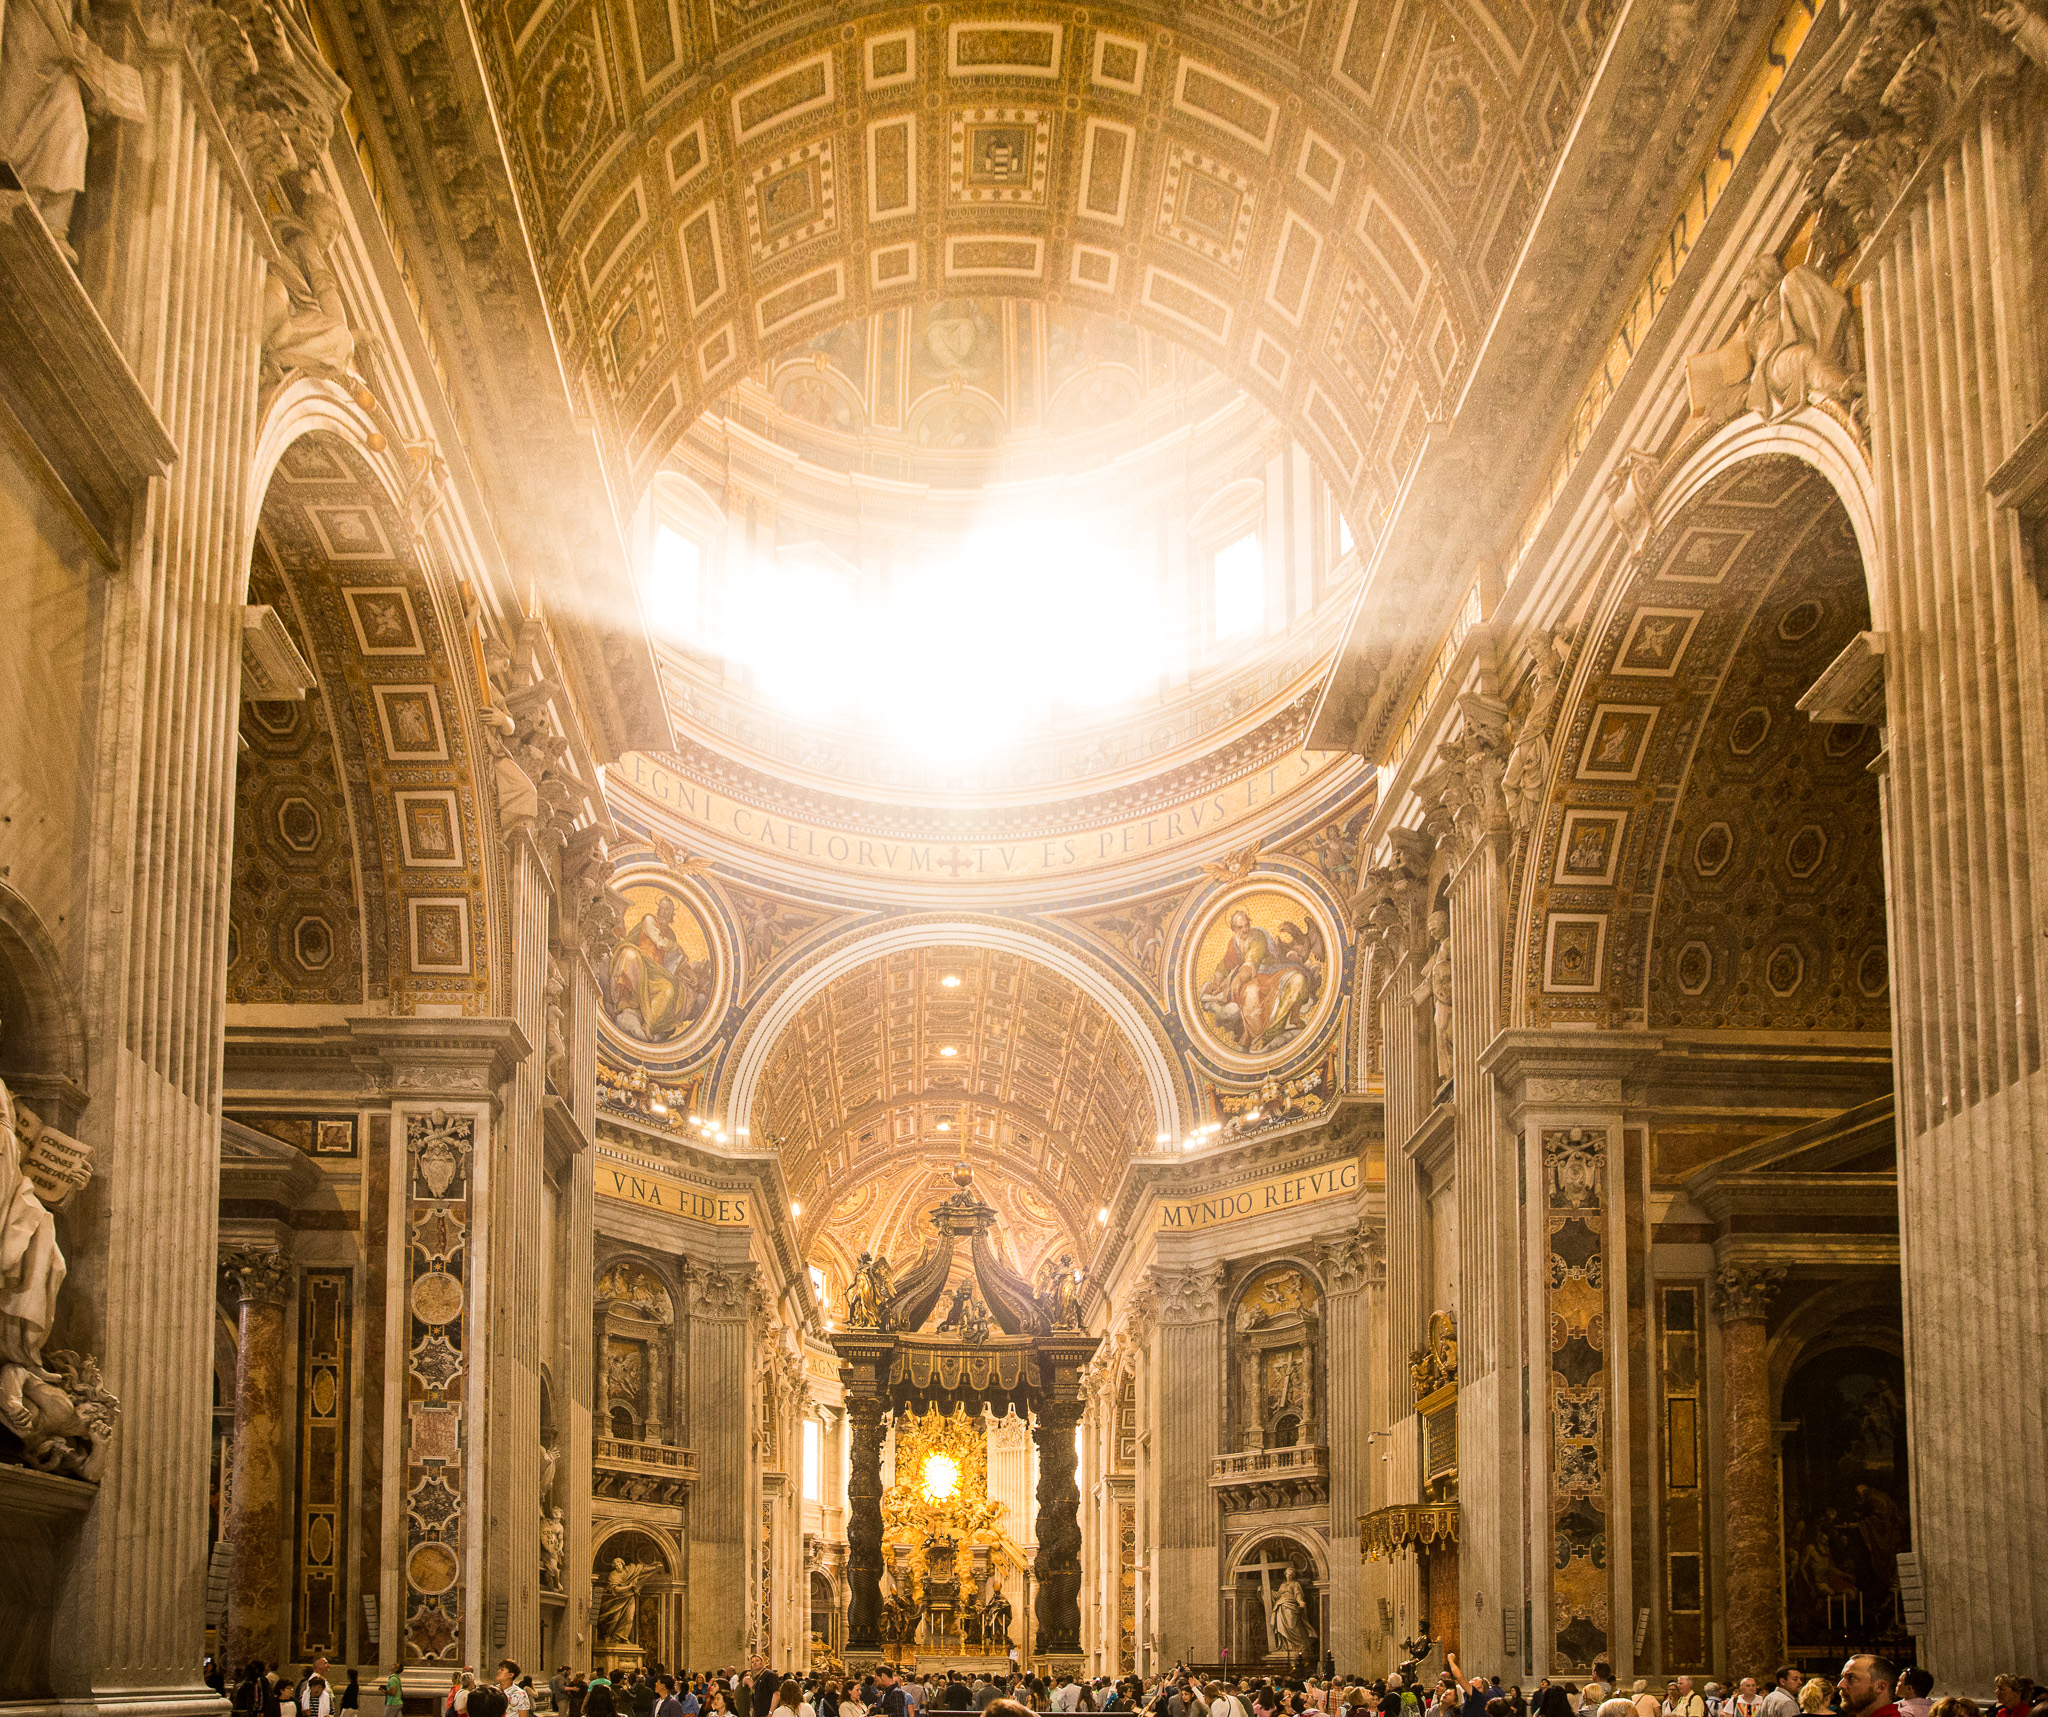 Rays of light shining through the dome of Saint Peter's Basilica